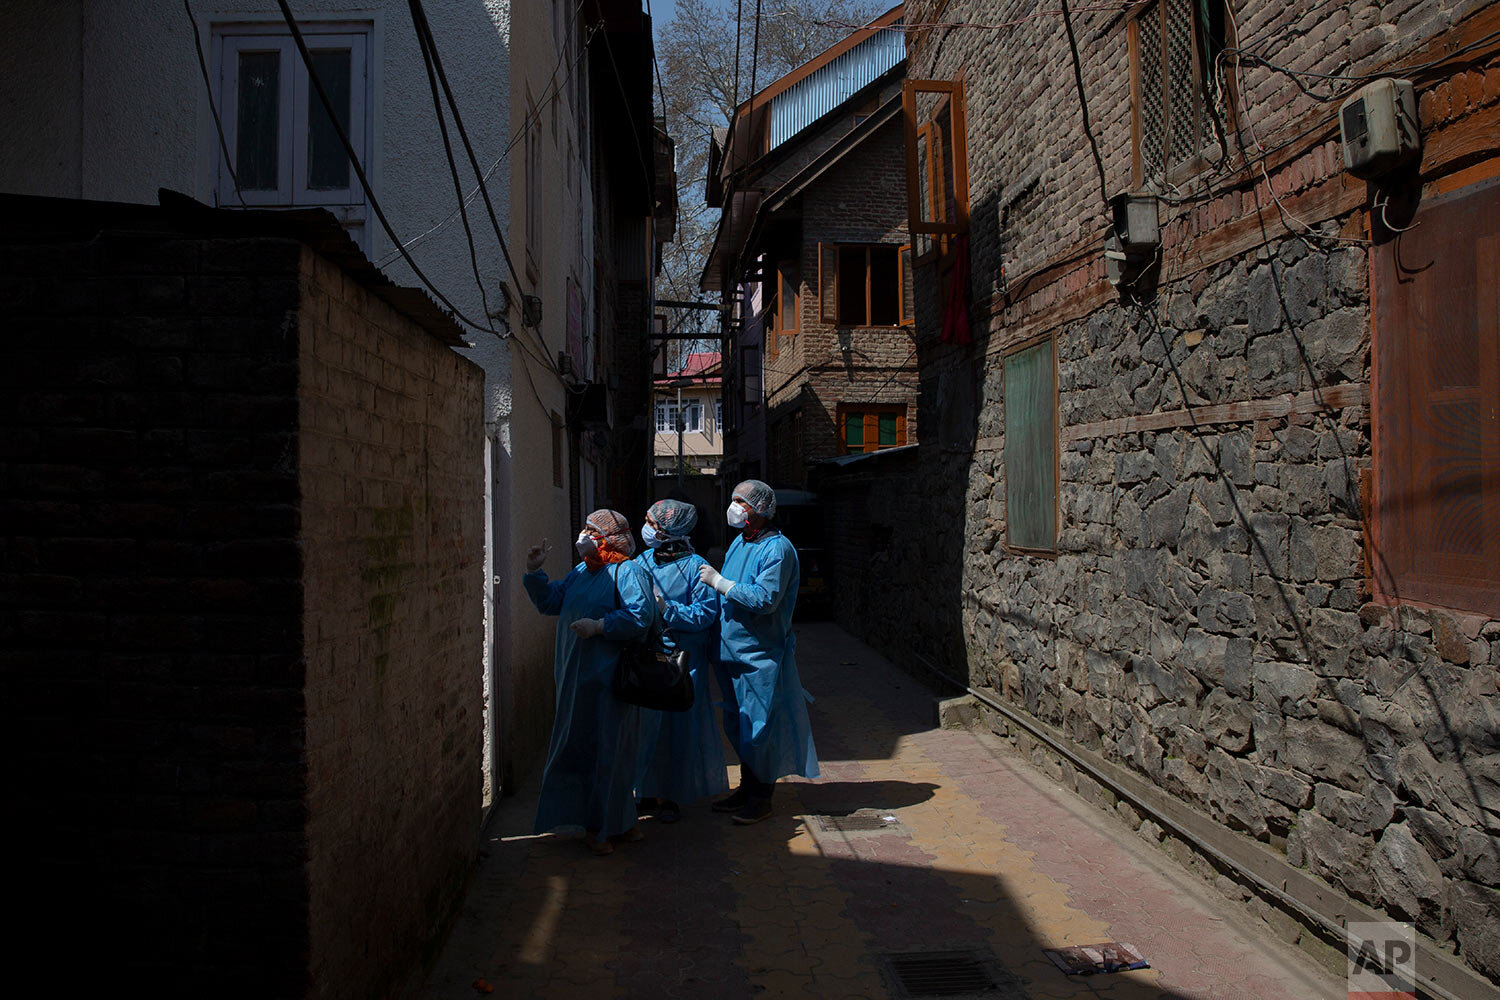  Kashmiri health workers prepares to enter a residential building during contact-tracing drive after the first person in the region was tested positive for COVID-19 in Srinagar, Indian controlled Kashmir, Thursday, March 19, 2020.(AP Photo/ Dar Yasin